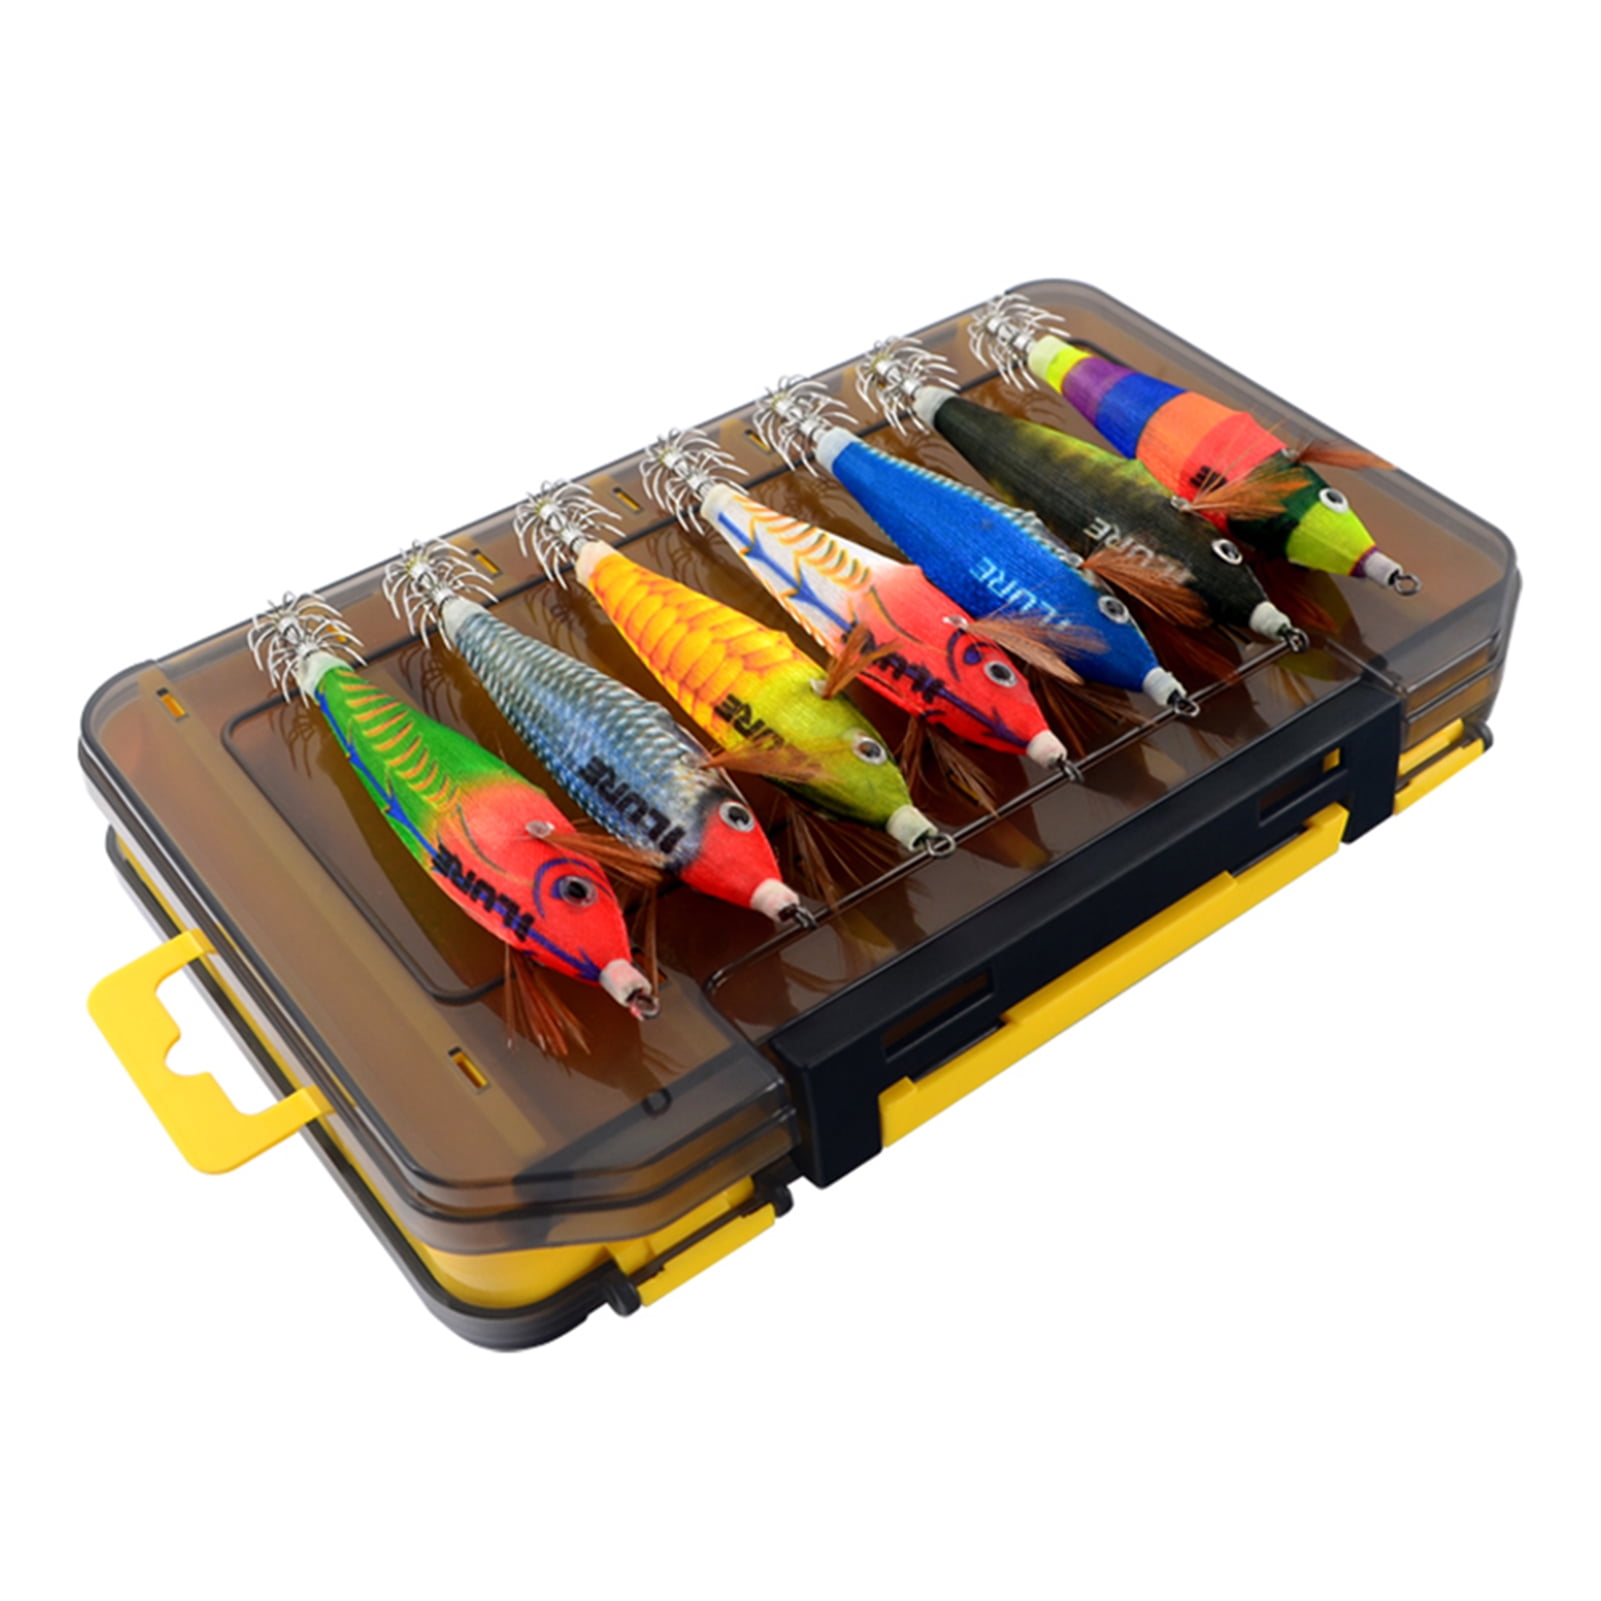 Colorful Fishing Lure Luminous Imitation Shrimp Hard Bait Prawn Lure with Squid Jigs Connector Rings Fishing Tackle Accessories, Size: Lure with Box